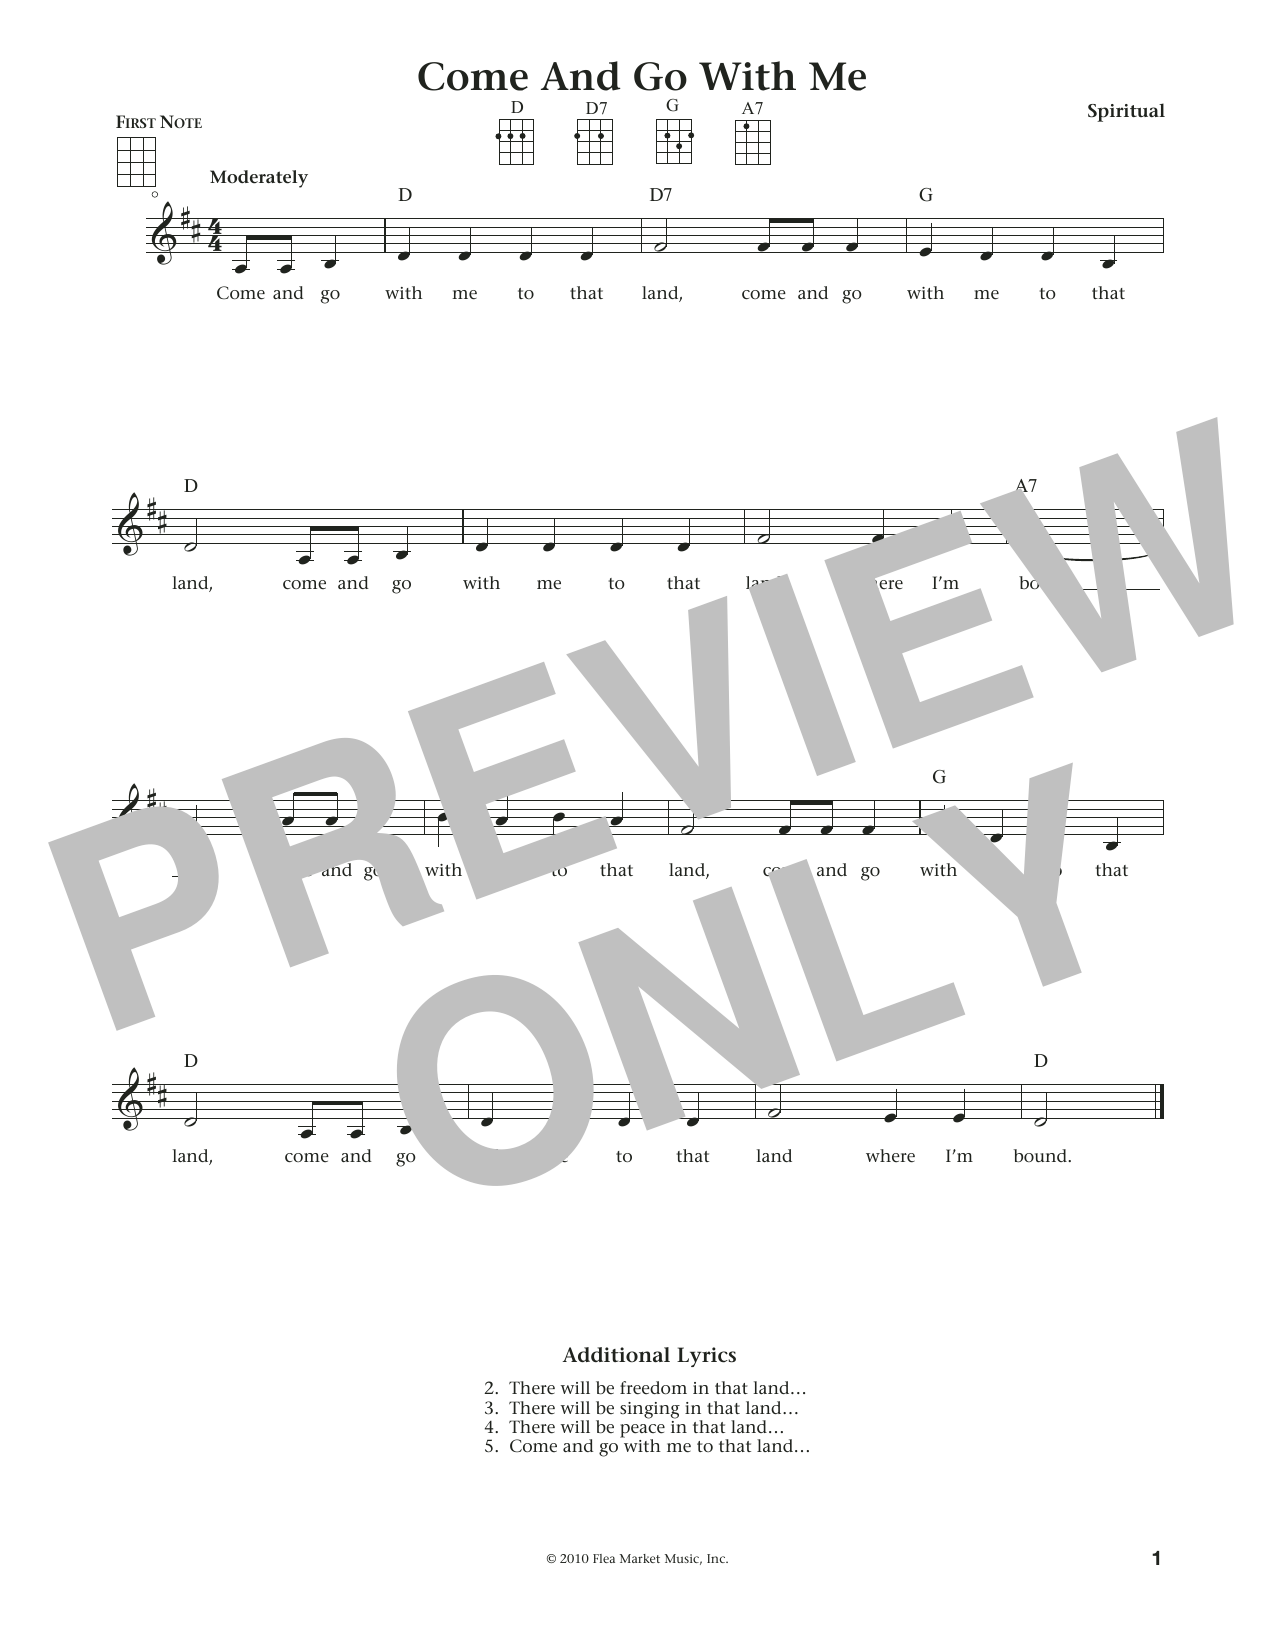 Download Spiritual Come And Go With Me (from The Daily Uku Sheet Music